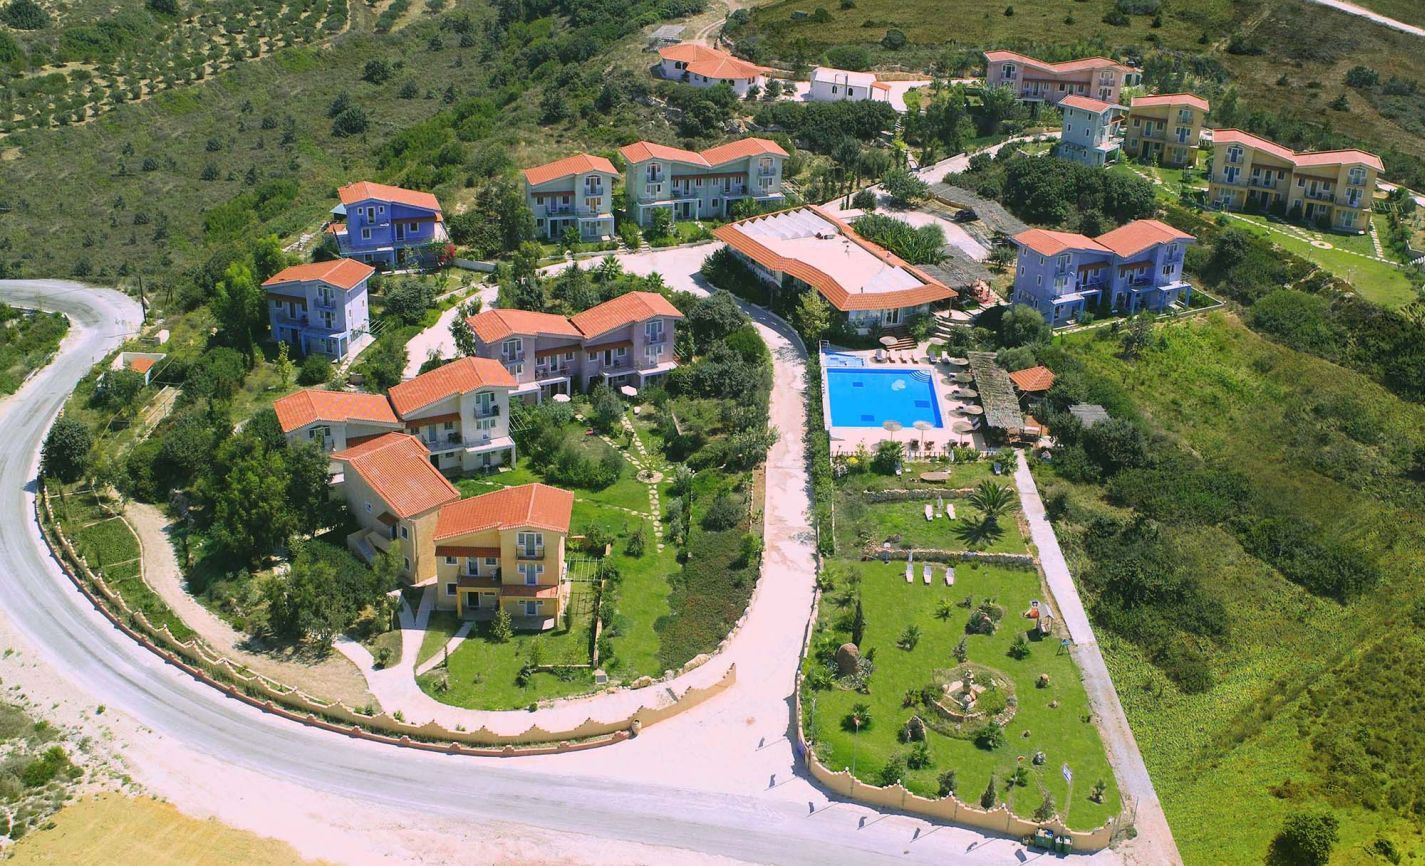 4* The Small Village - Κως ✦ -30% ✦ 2 Ημέρες (1 Διανυκτέρευση)